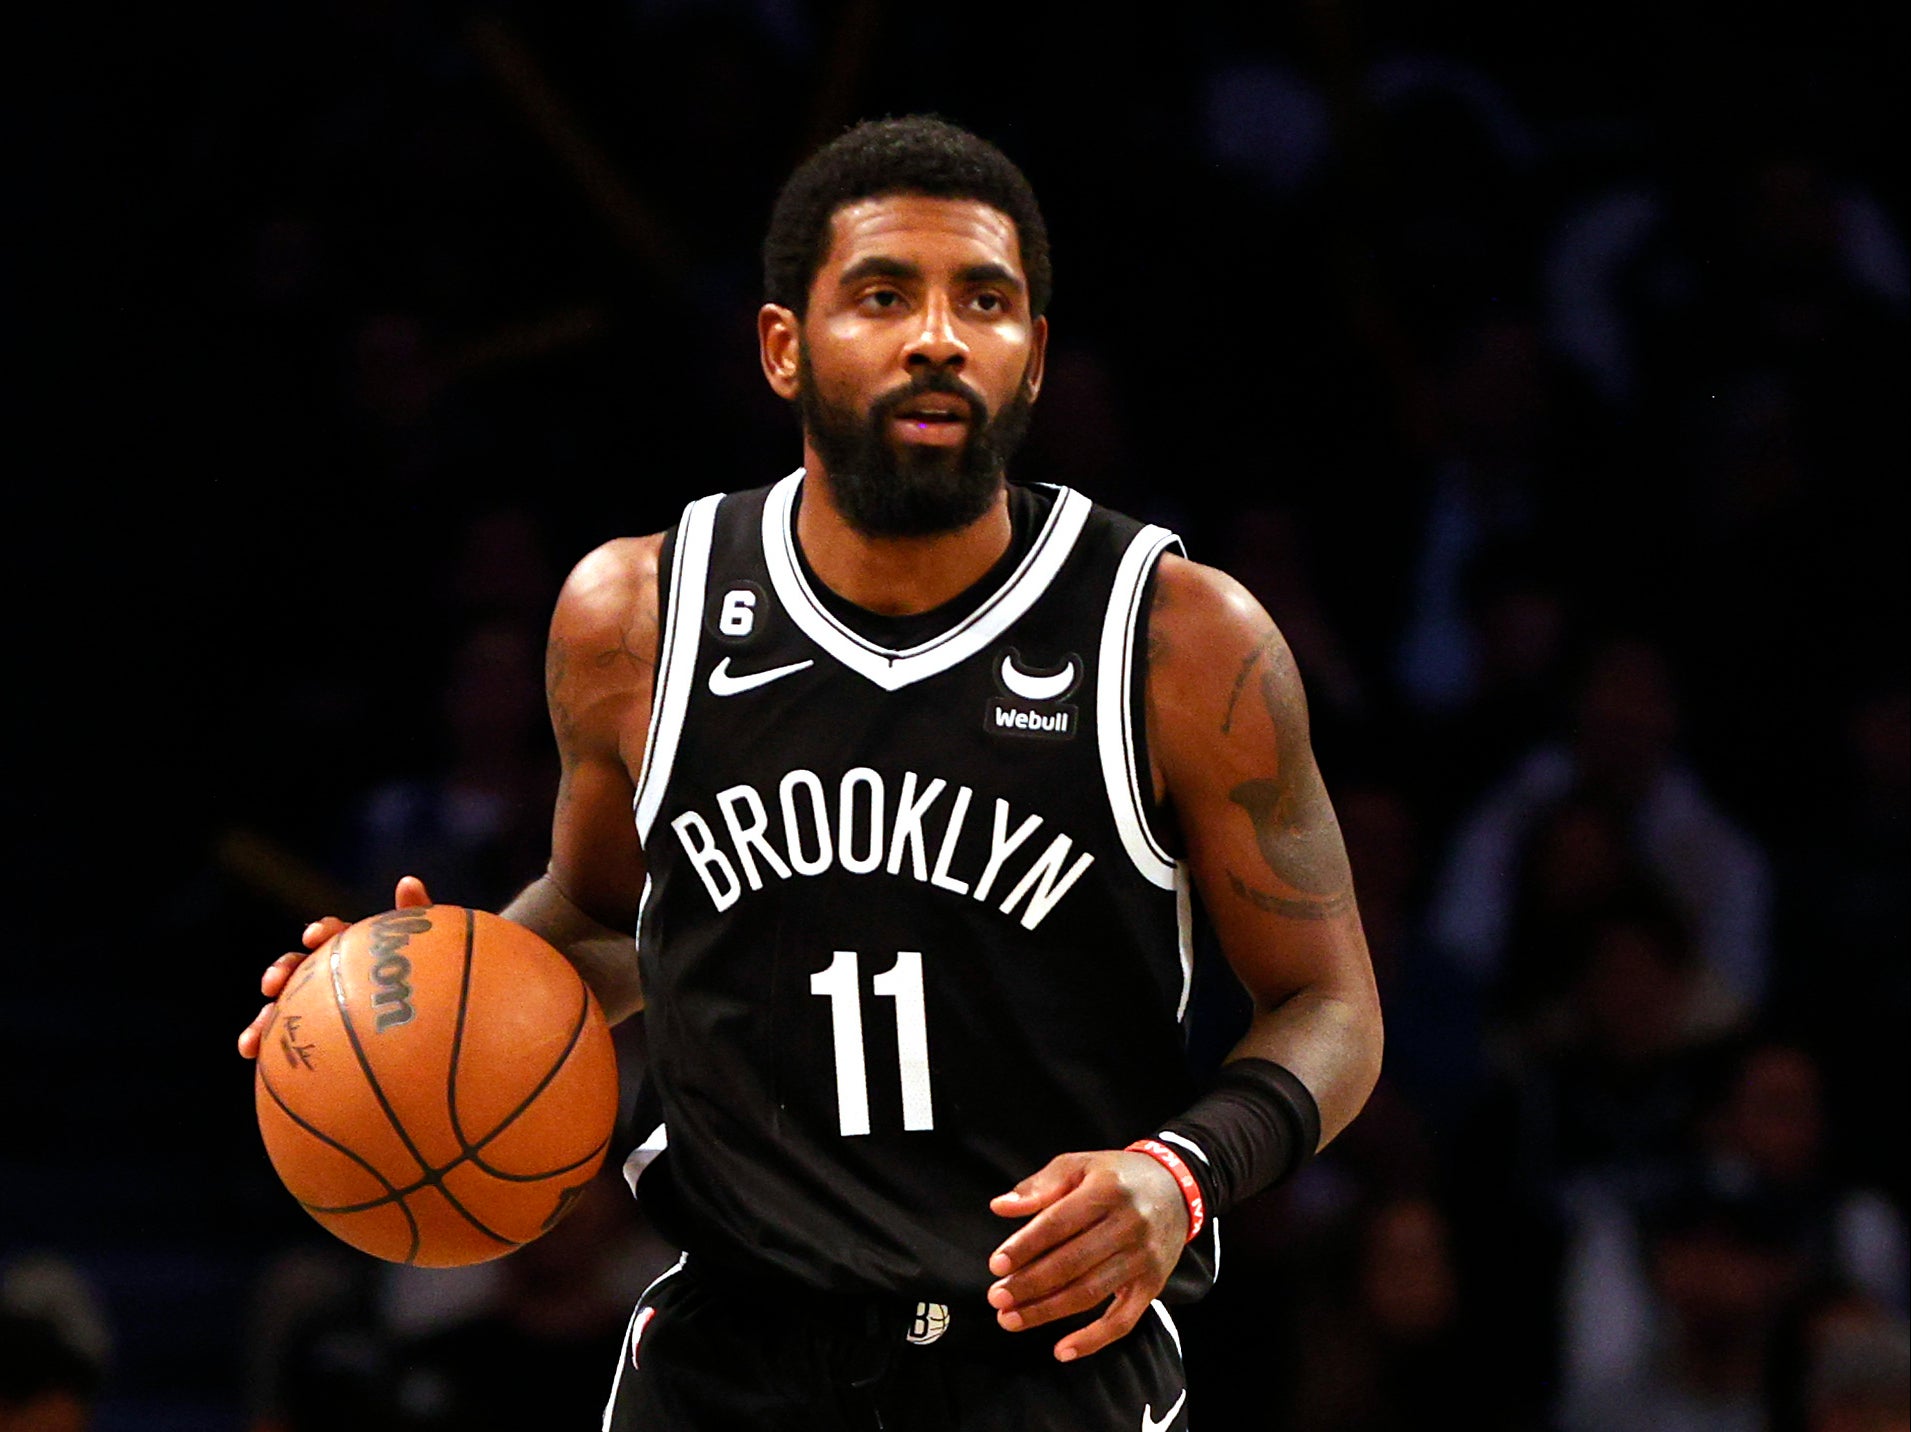 Brooklyn Nets: Kyrie Irving's latest comments and donations should